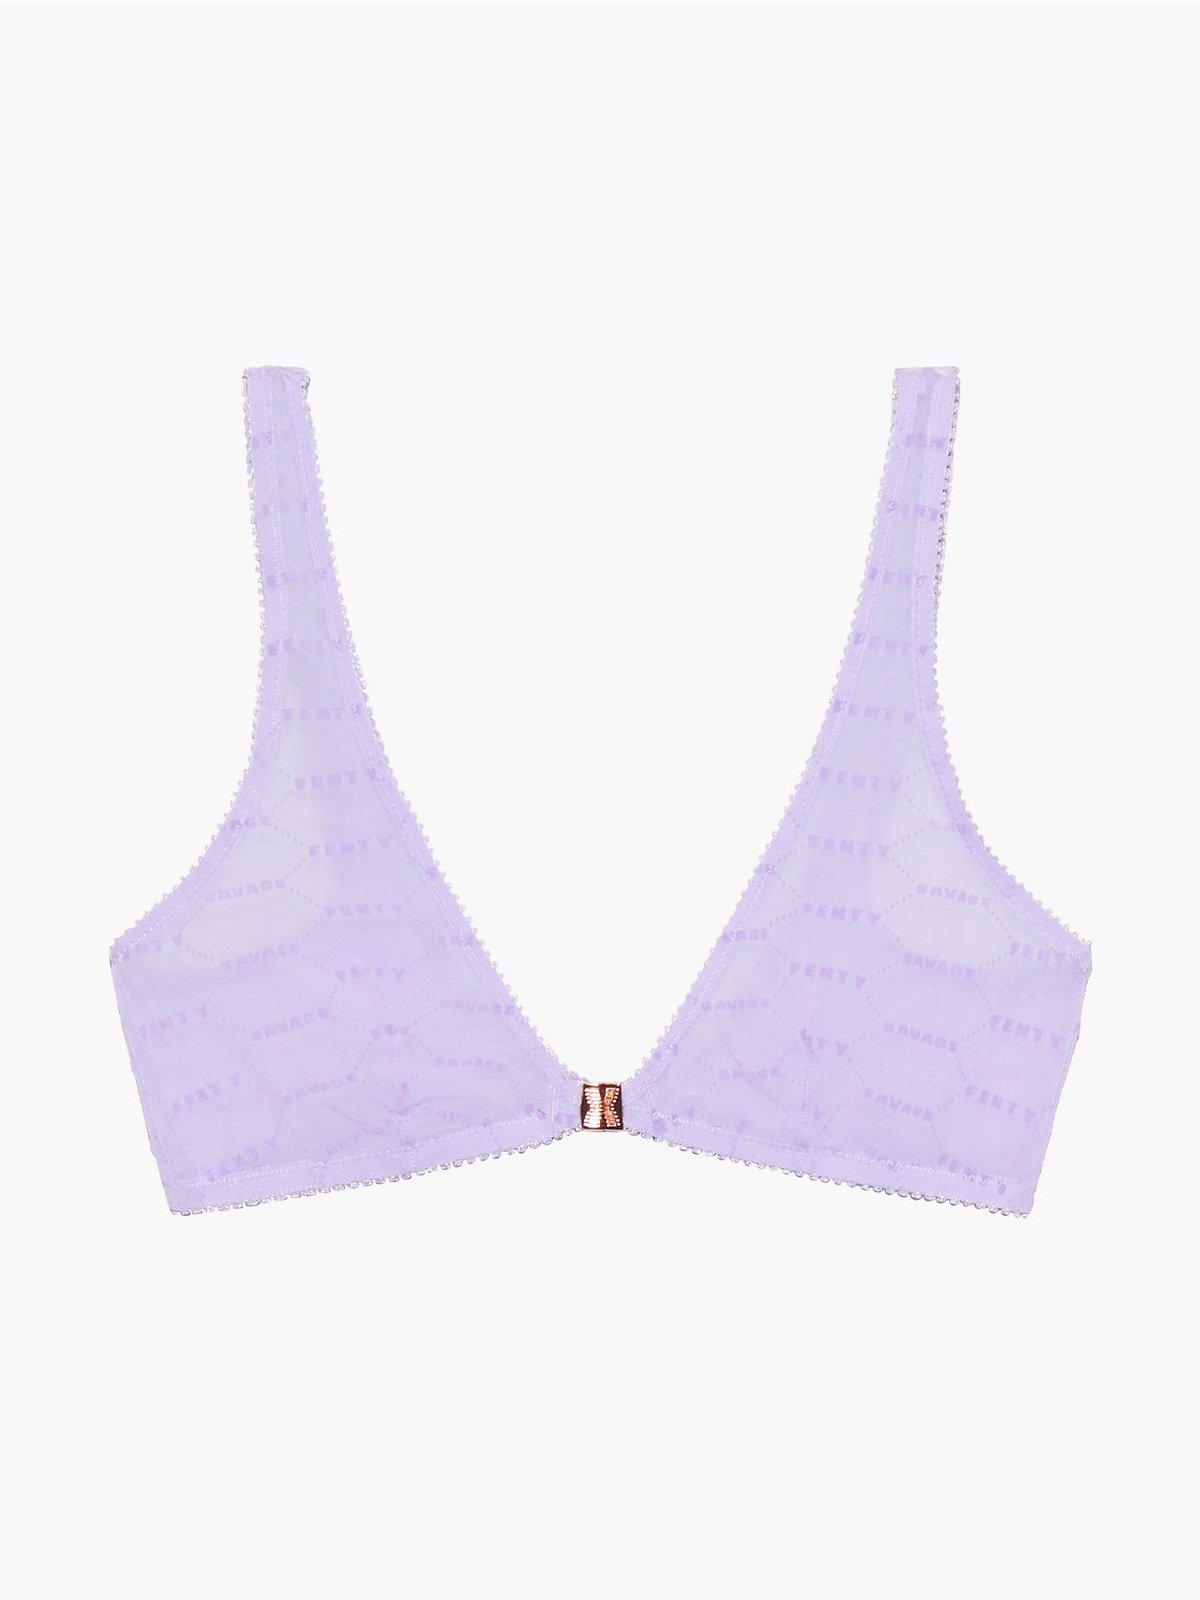 Savage x Fenty all over logo triangle bralette in heather gray